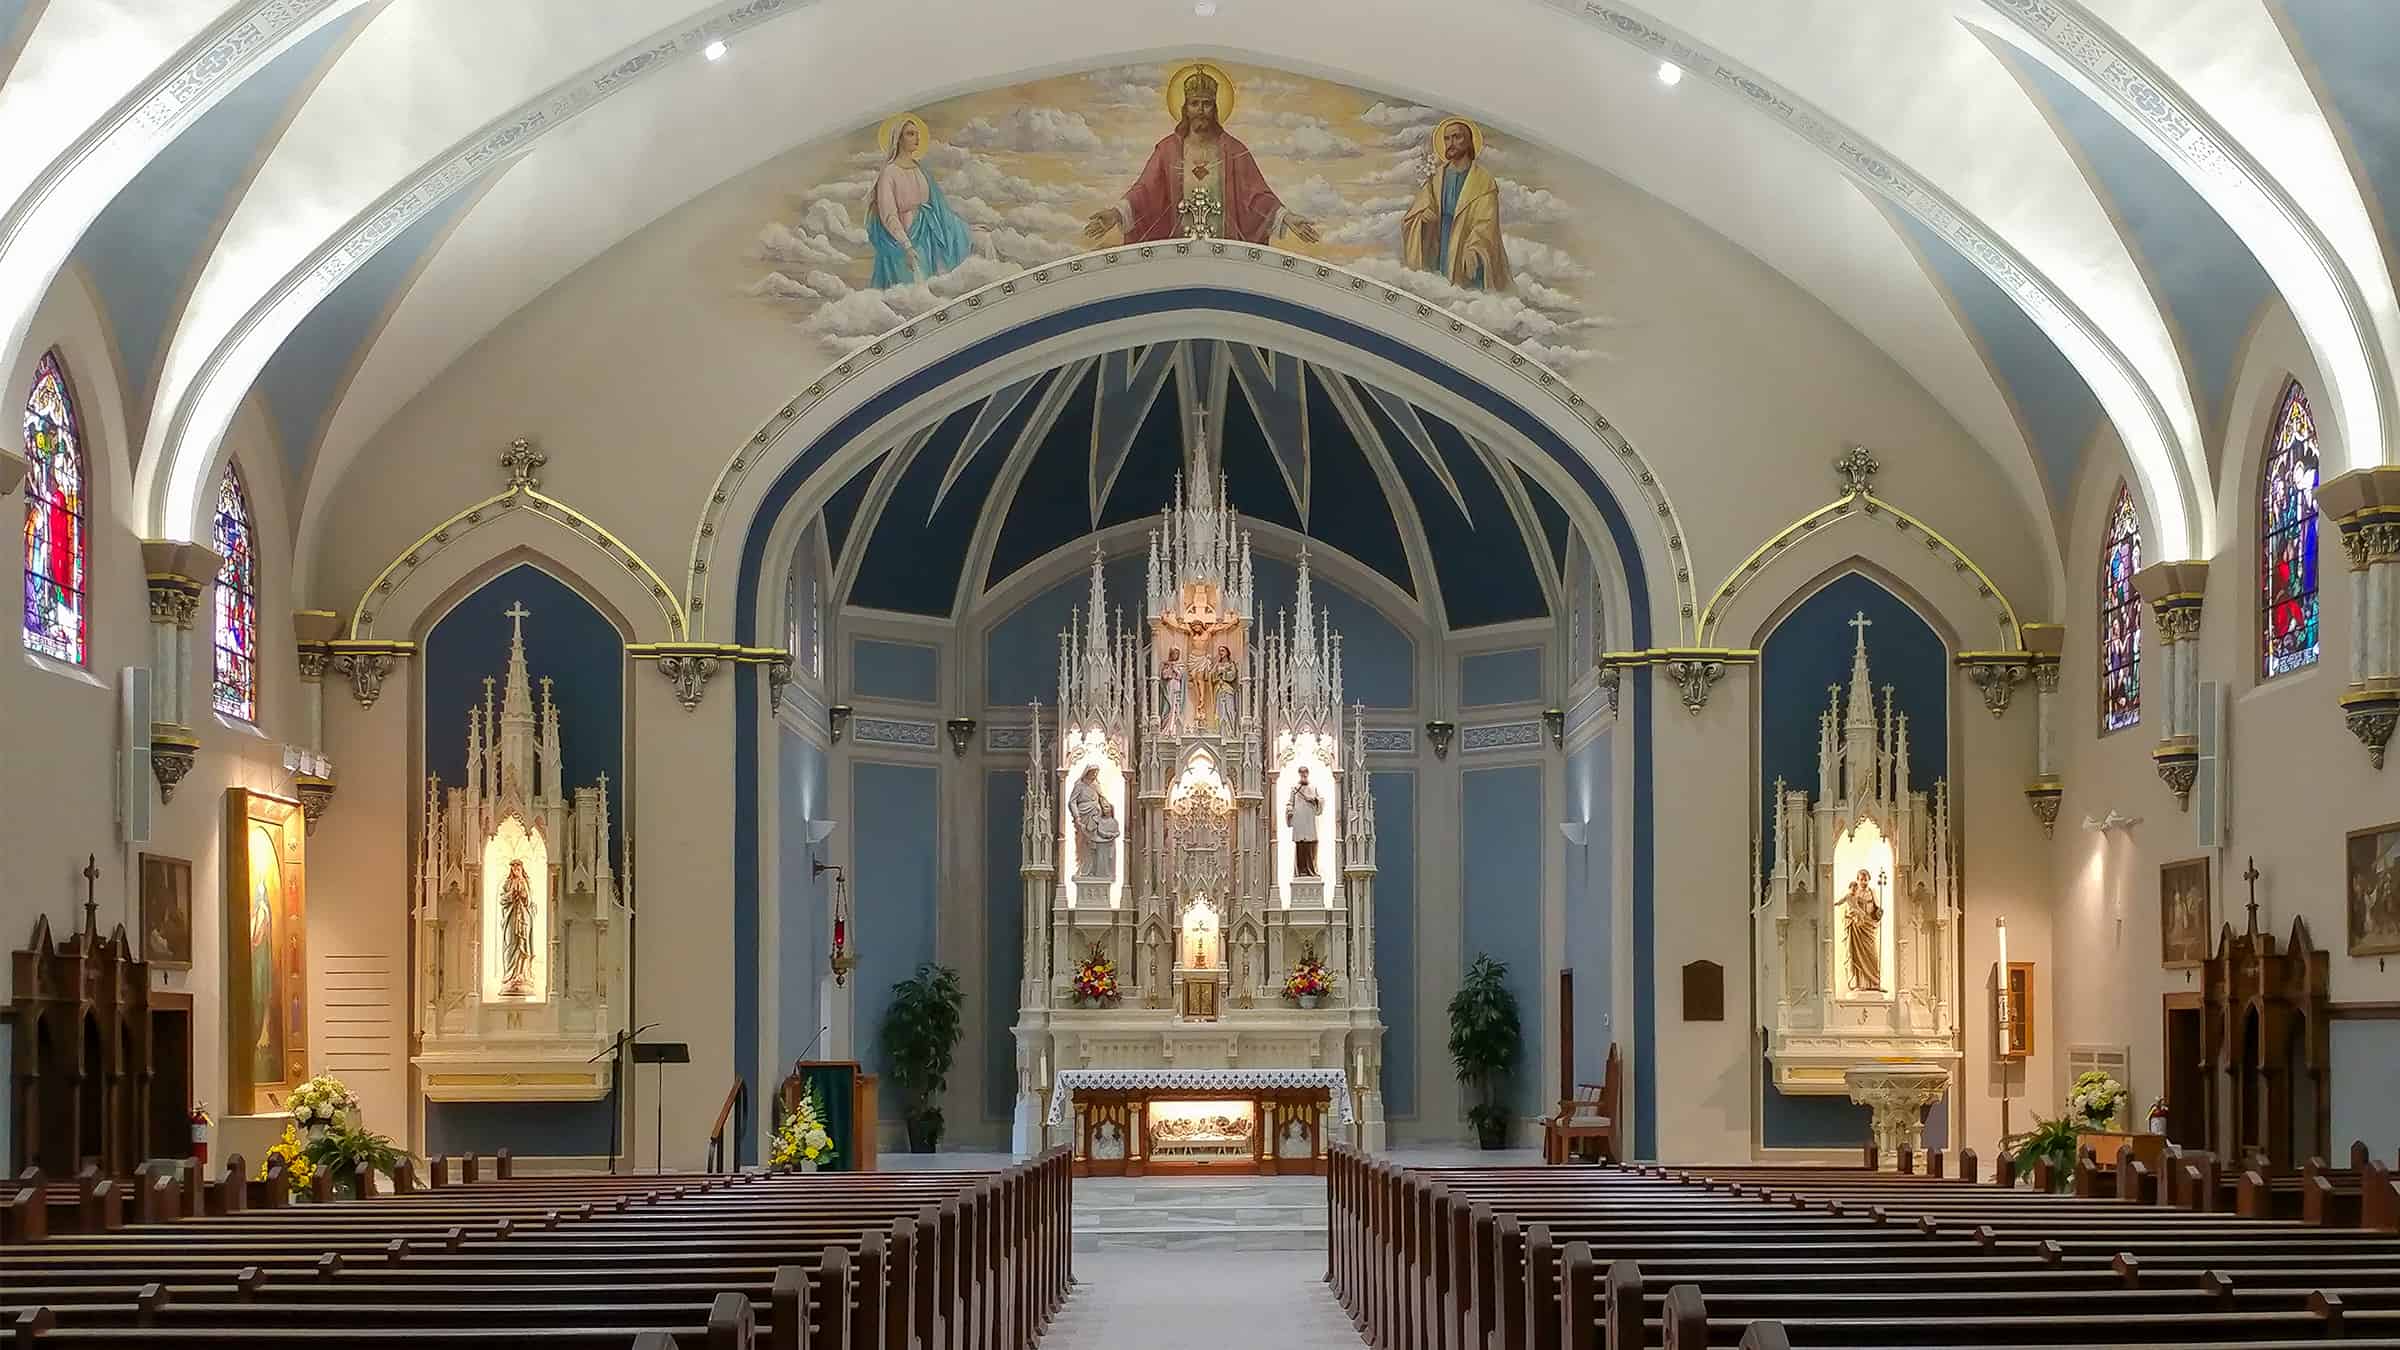 Good Shepherd Parish Catholic Church - Interior with View of Altar and Side Altars